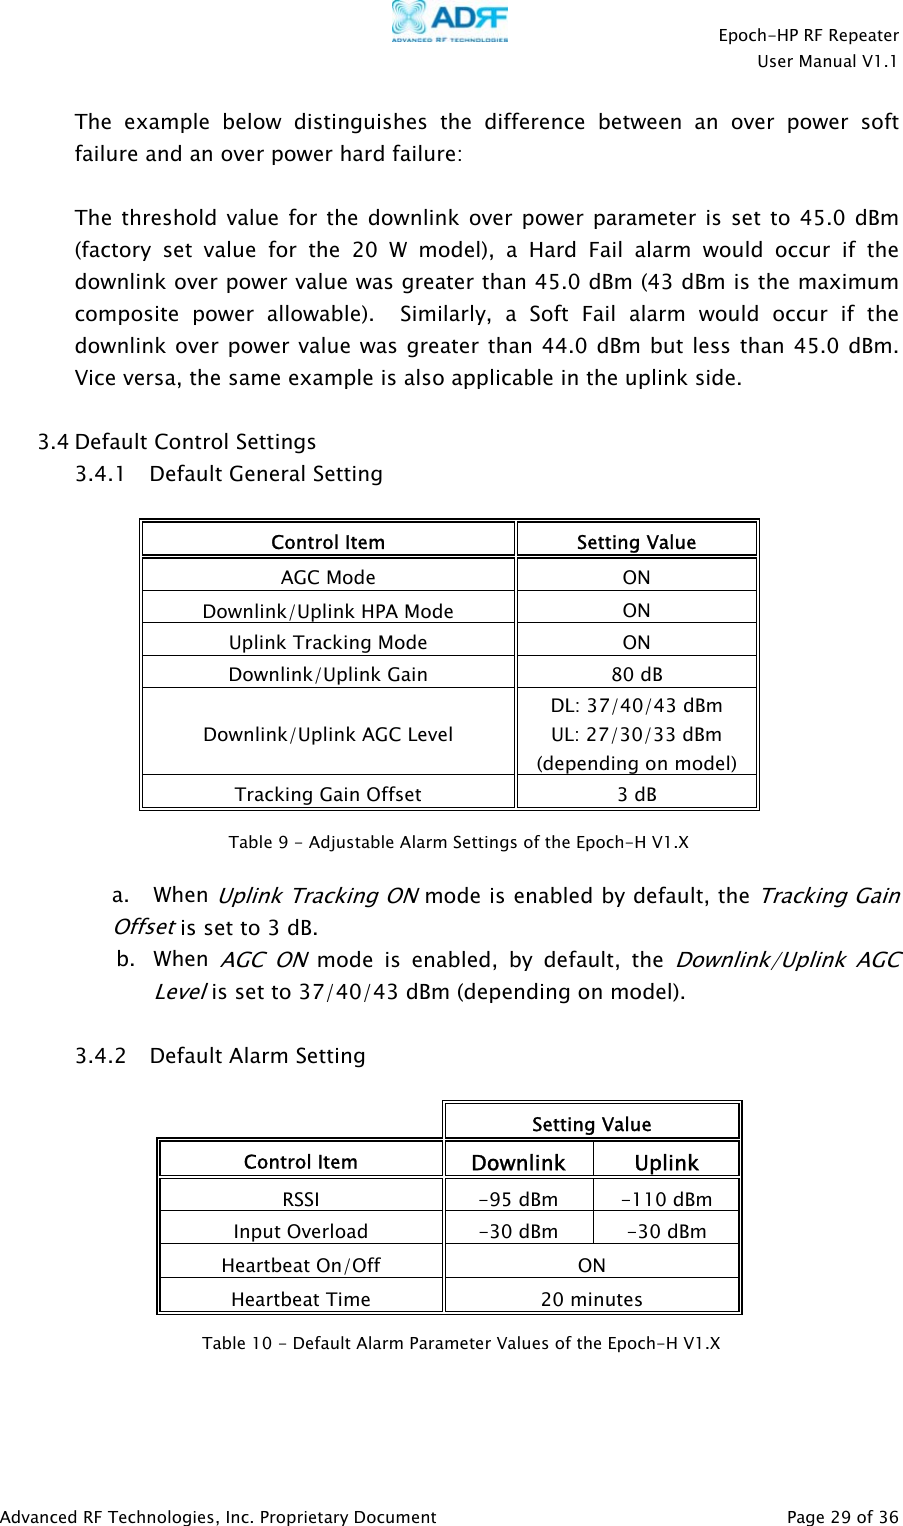    Epoch-HP RF Repeater  User Manual V1.1  Advanced RF Technologies, Inc. Proprietary Document   Page 29 of 36  The example below distinguishes the difference between an over power soft failure and an over power hard failure:  The threshold value for the downlink over power parameter is set to 45.0 dBm (factory set value for the 20 W model), a Hard Fail alarm would occur if the downlink over power value was greater than 45.0 dBm (43 dBm is the maximum composite power allowable).  Similarly, a Soft Fail alarm would occur if the downlink over power value was greater than 44.0 dBm but less than 45.0 dBm.  Vice versa, the same example is also applicable in the uplink side.  3.4 Default Control Settings 3.4.1 Default General Setting  Control Item  Setting Value AGC Mode  ON Downlink/Uplink HPA Mode   ON Uplink Tracking Mode  ON Downlink/Uplink Gain  80 dB Downlink/Uplink AGC Level DL: 37/40/43 dBm UL: 27/30/33 dBm (depending on model) Tracking Gain Offset  3 dB   a.   When Uplink Tracking ON mode is enabled by default, the Tracking Gain Offset is set to 3 dB. b. When AGC ON mode is enabled, by default, the Downlink/Uplink AGC Level is set to 37/40/43 dBm (depending on model).  3.4.2 Default Alarm Setting   Setting Value Control Item  Downlink Uplink RSSI   -95 dBm  -110 dBm Input Overload  -30 dBm  -30 dBm Heartbeat On/Off  ON Heartbeat Time  20 minutes     Table 10 - Default Alarm Parameter Values of the Epoch-H V1.X Table 9 - Adjustable Alarm Settings of the Epoch-H V1.X